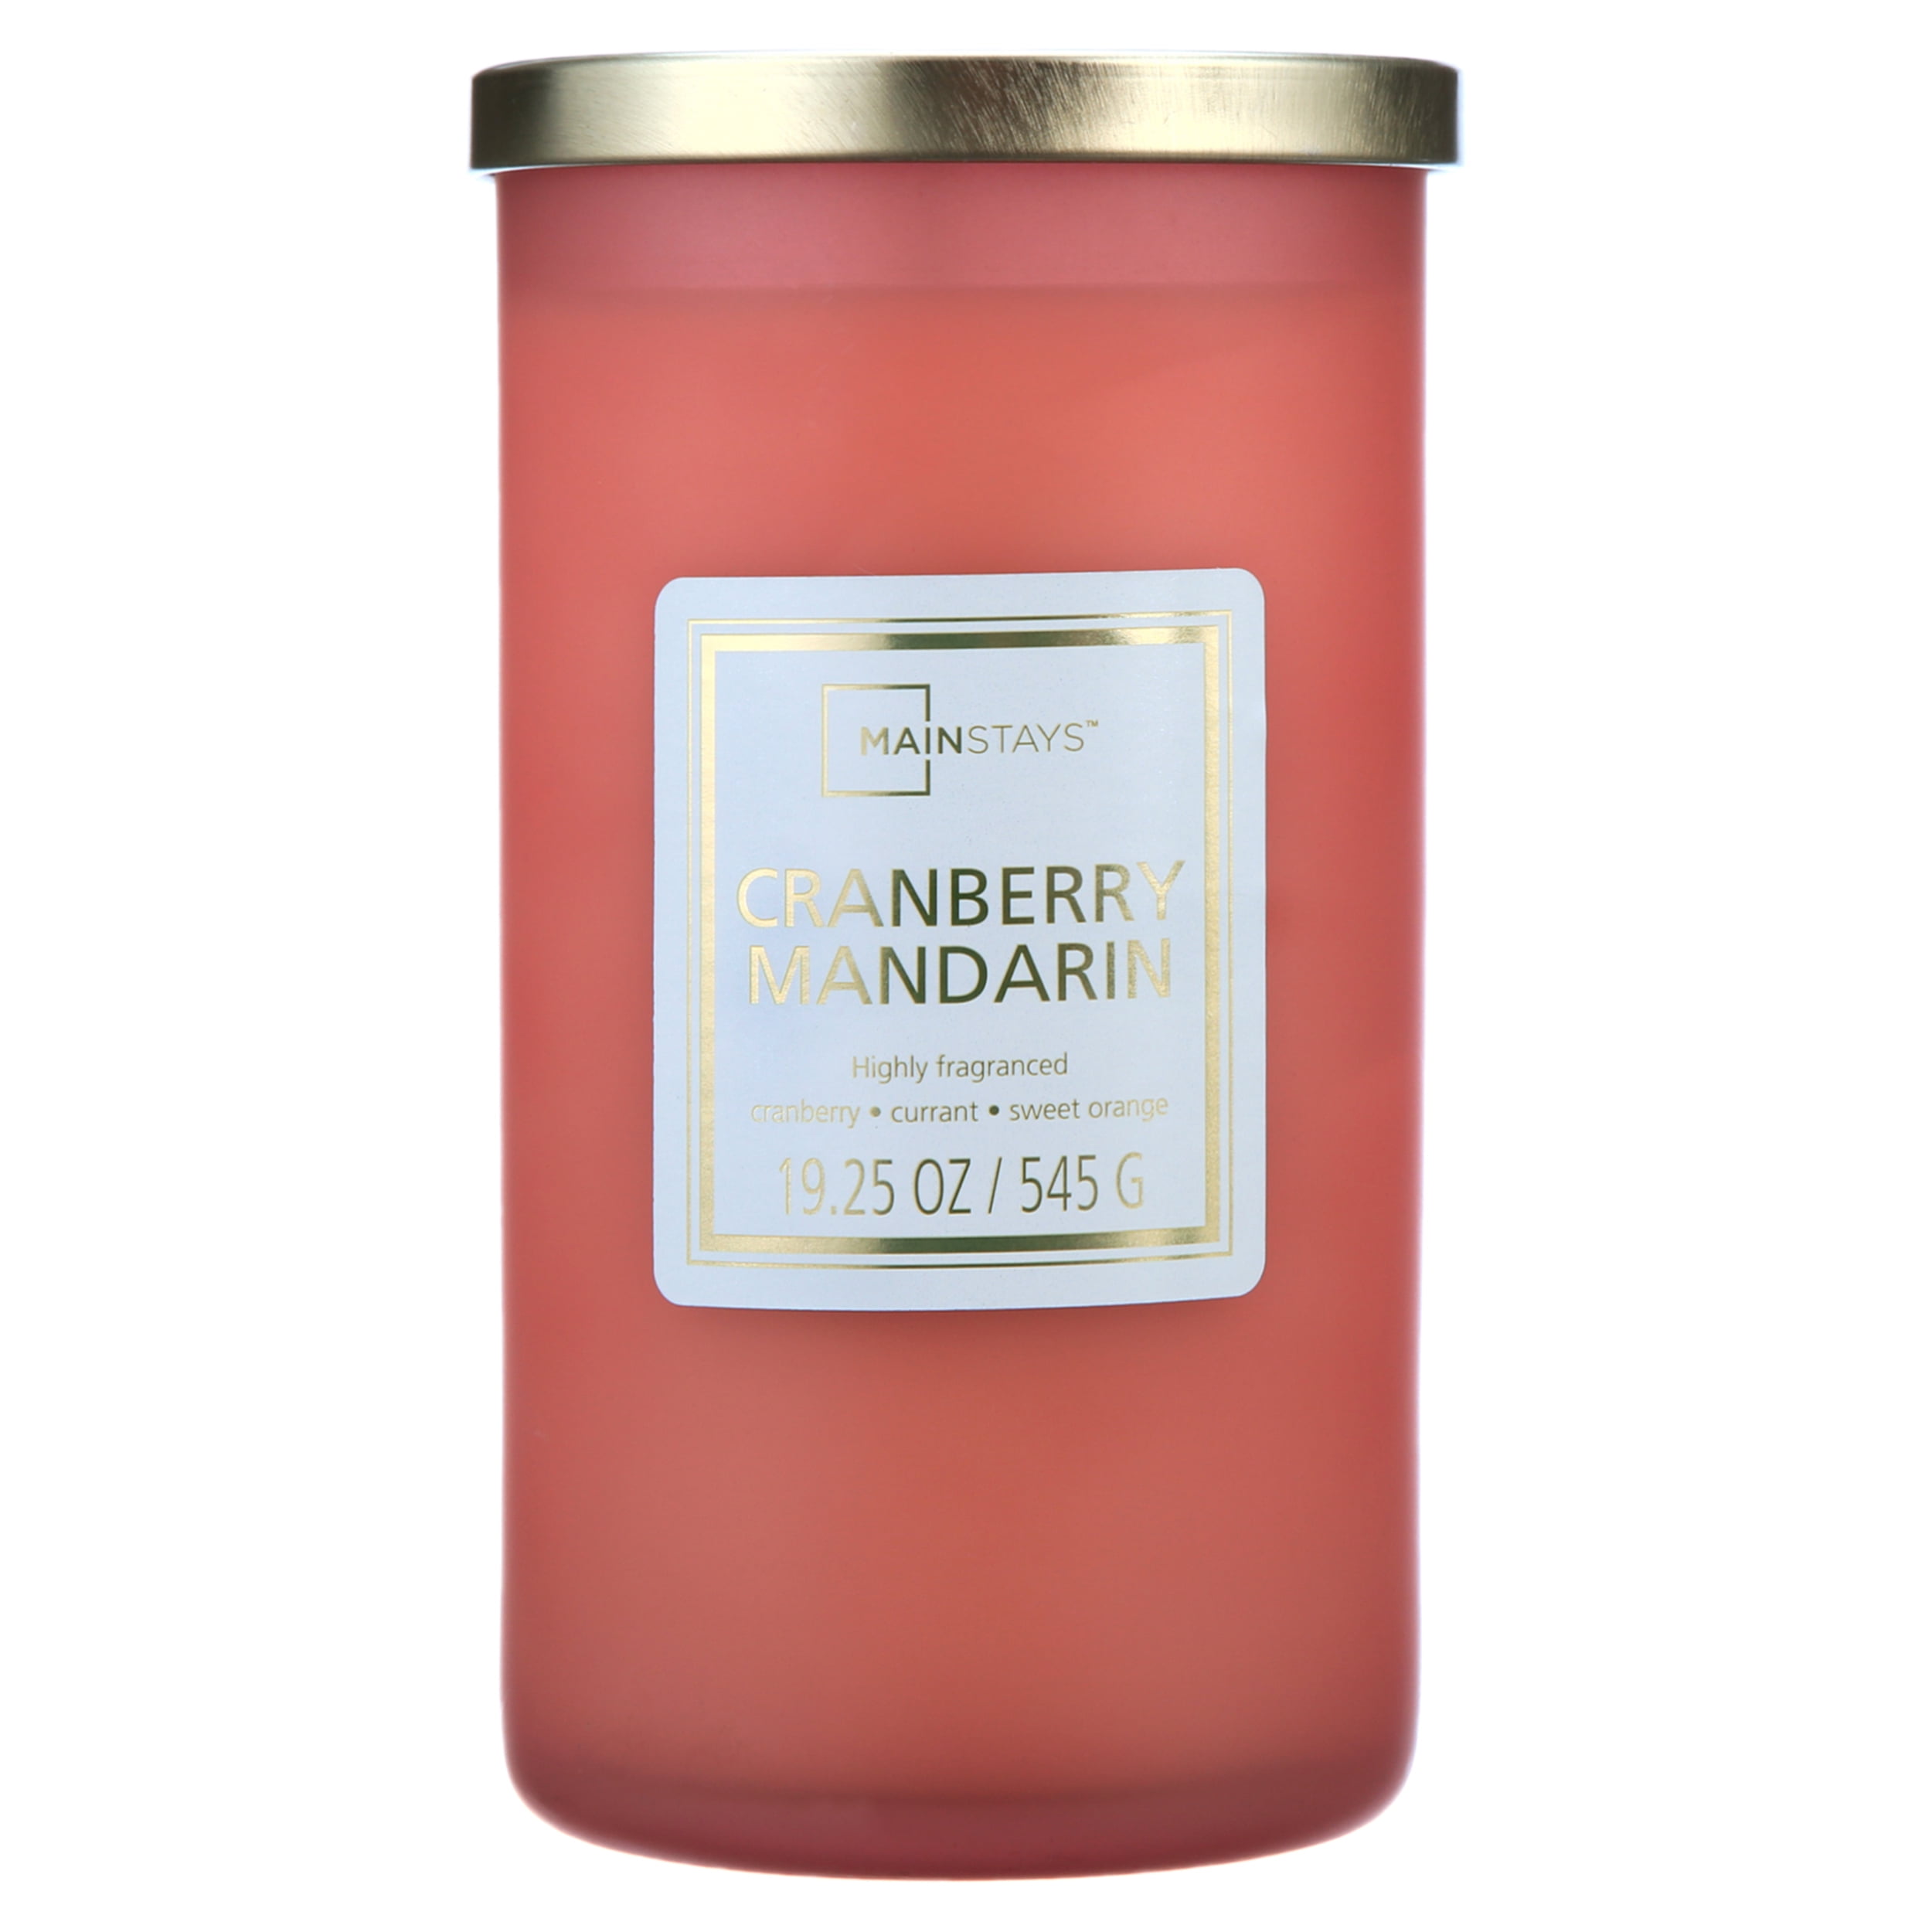 Cranberry Mandarin Scented Cash Candles Up to $50 with REAL money inside 